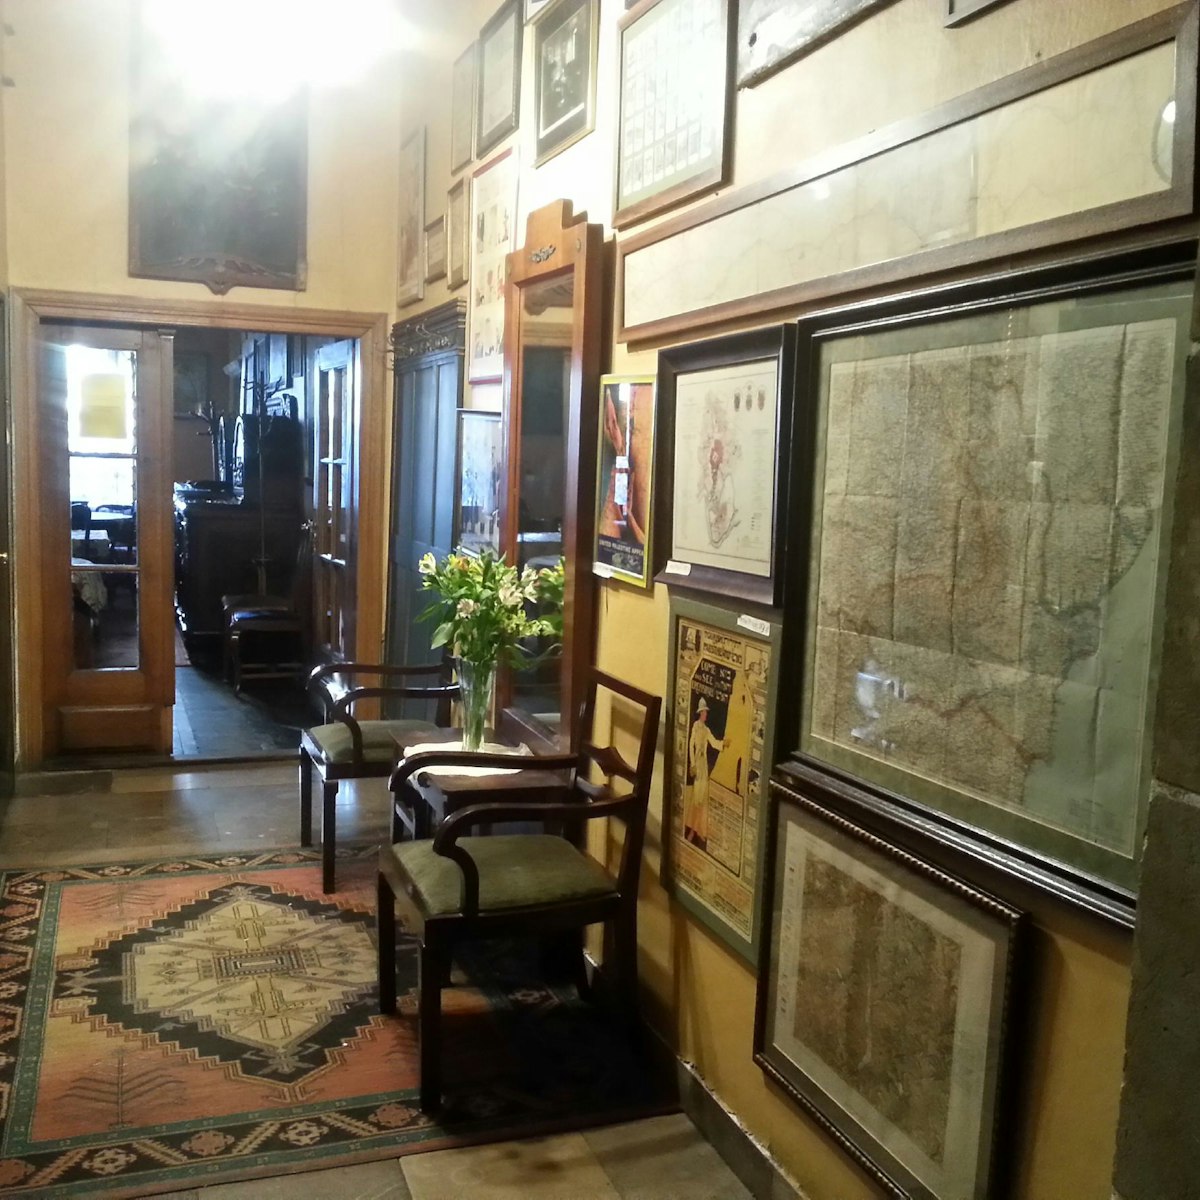 Klezmer-Hois, hallway in the building leading to restaurant and cafe full of antique furnishings